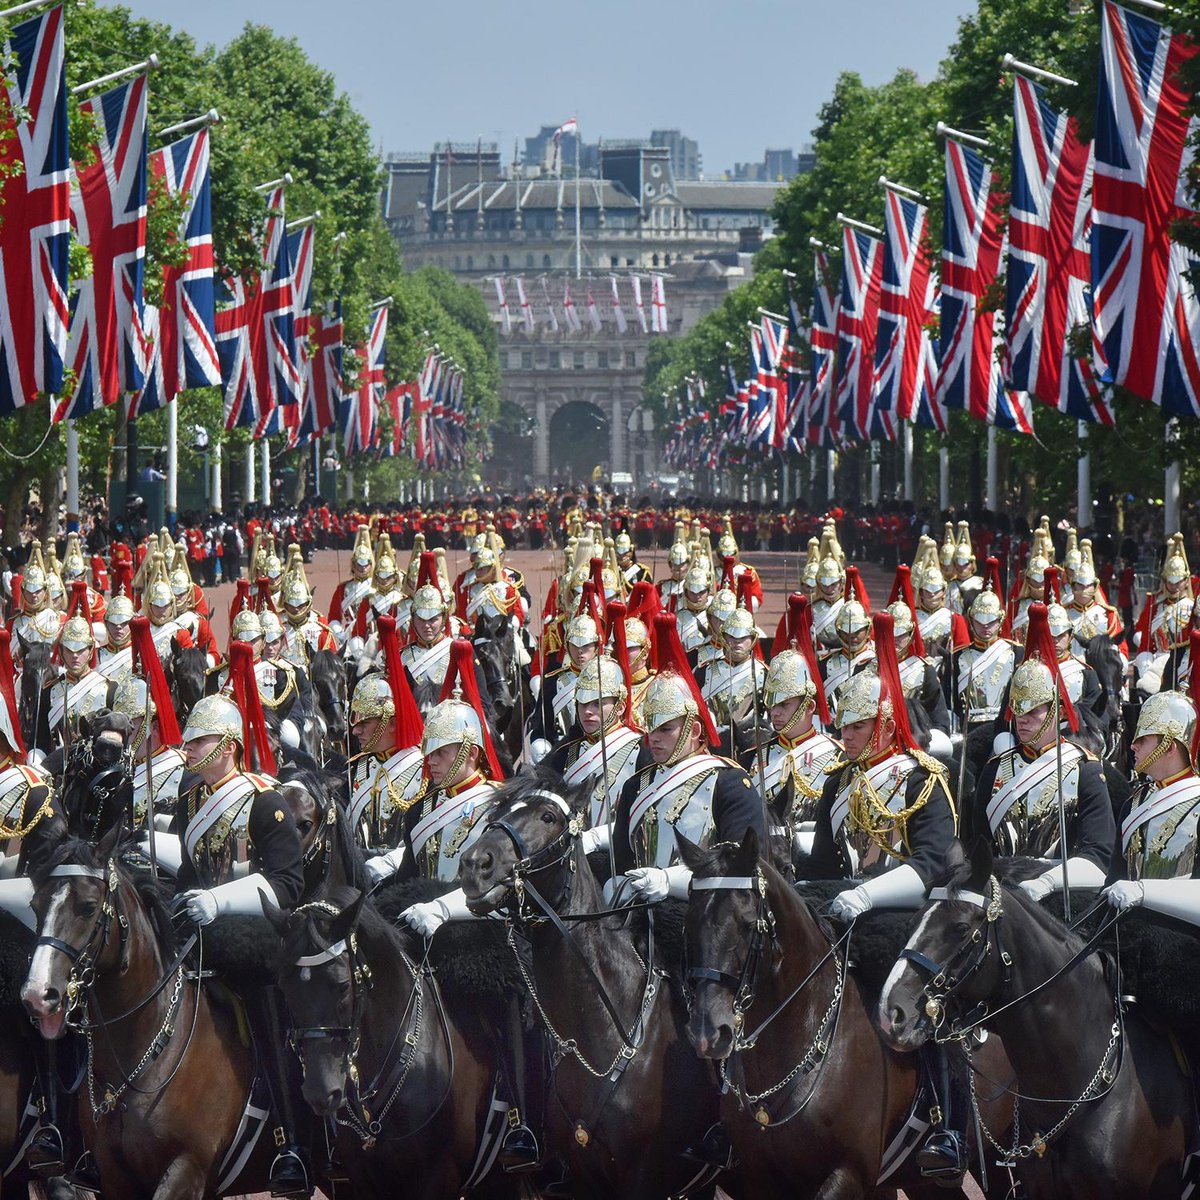 A magnificent sight, the Household Cavalry.

#Householdcavalry #Unionjacks #Britisharmy #BritishMonarchy #Britishtroops